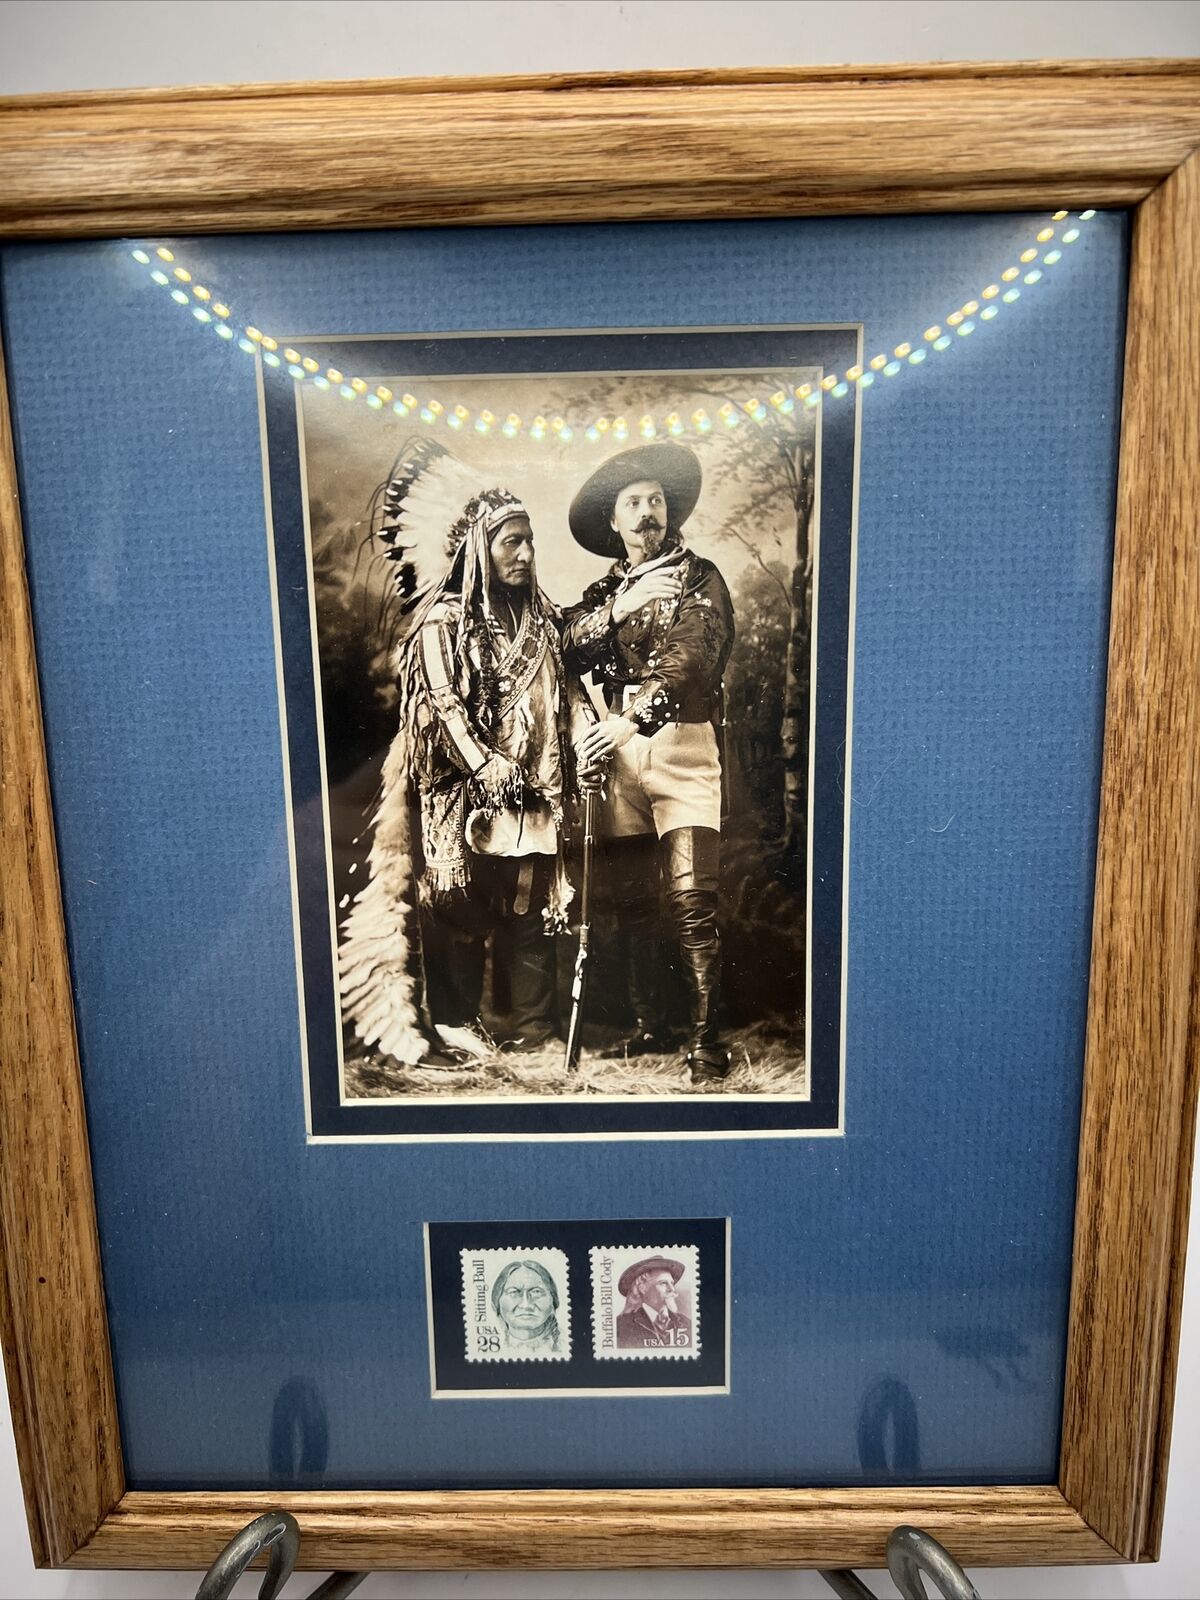 1880 Photo Of Sitting Bull And William F. Buffalo Bill Cody Matted With Stamps